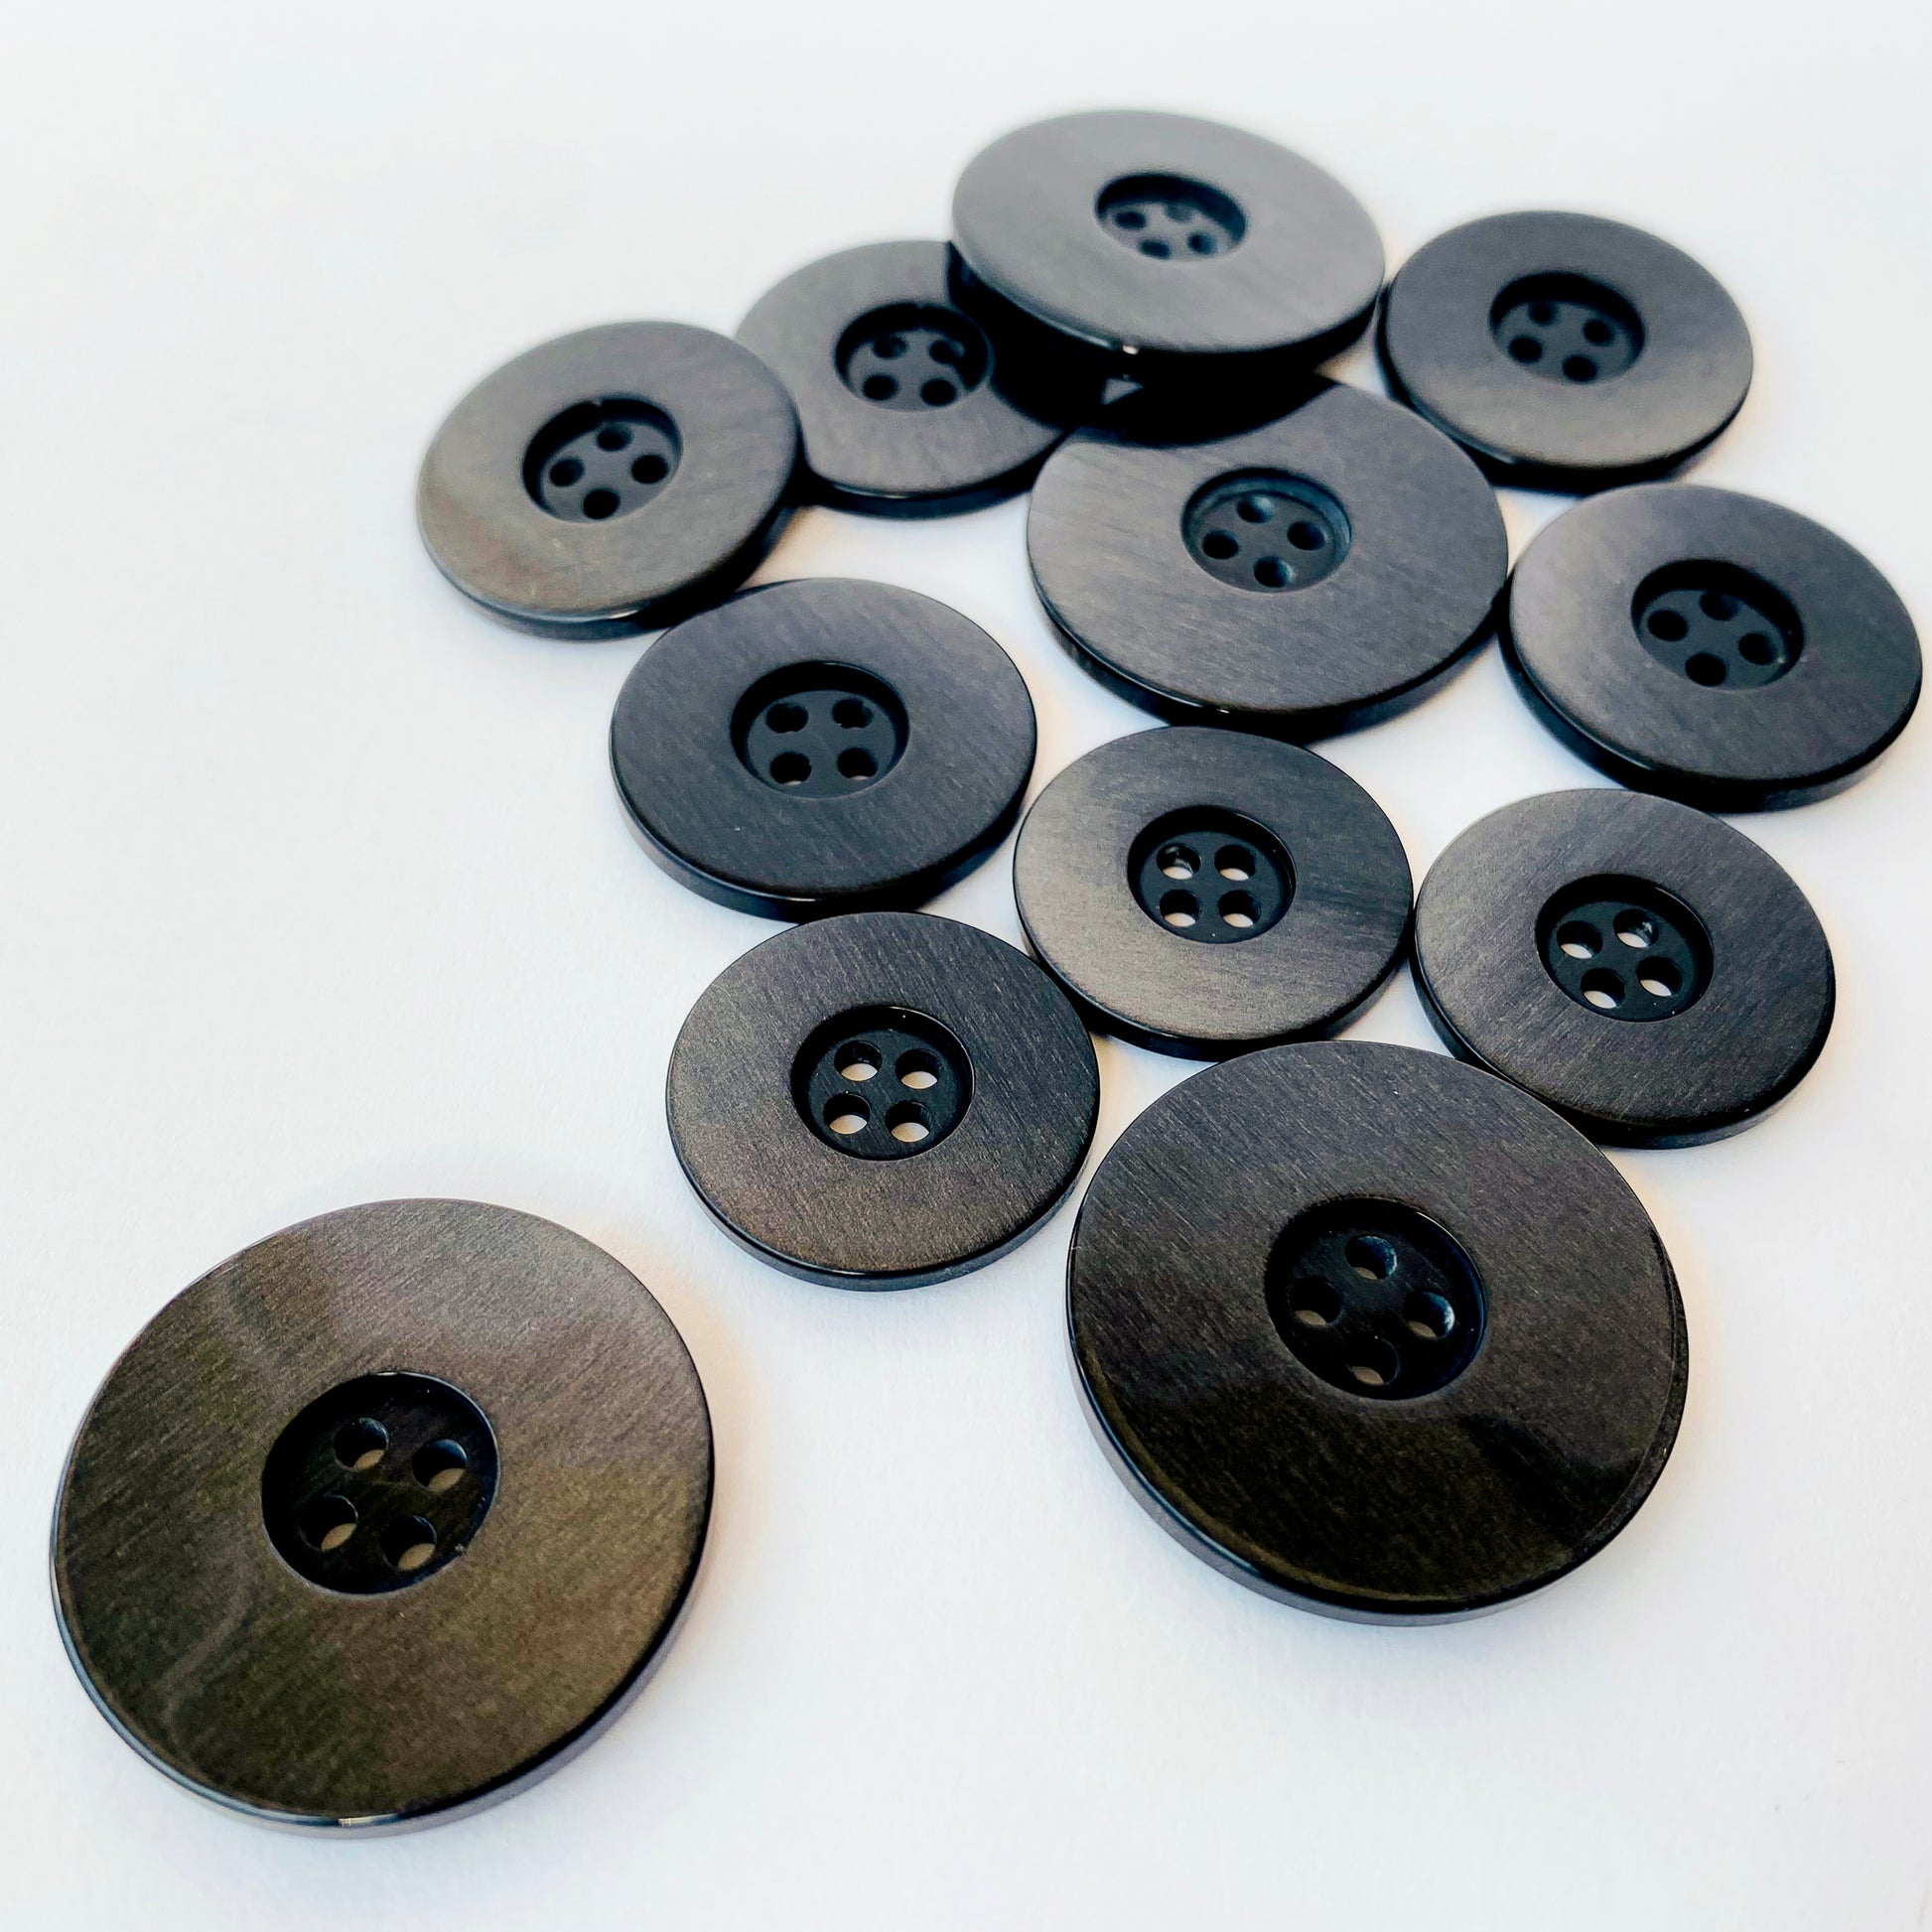 Black iridescent Buttons  Luxury, high quality hand finished iridescent suiting buttons.  Col: Black back with a pearlised luster finish to suit most dark fabrics  Sizes: 36L (23mm), 40L (26mm), 48L (31mm)  Origin: Italy / Deadstock